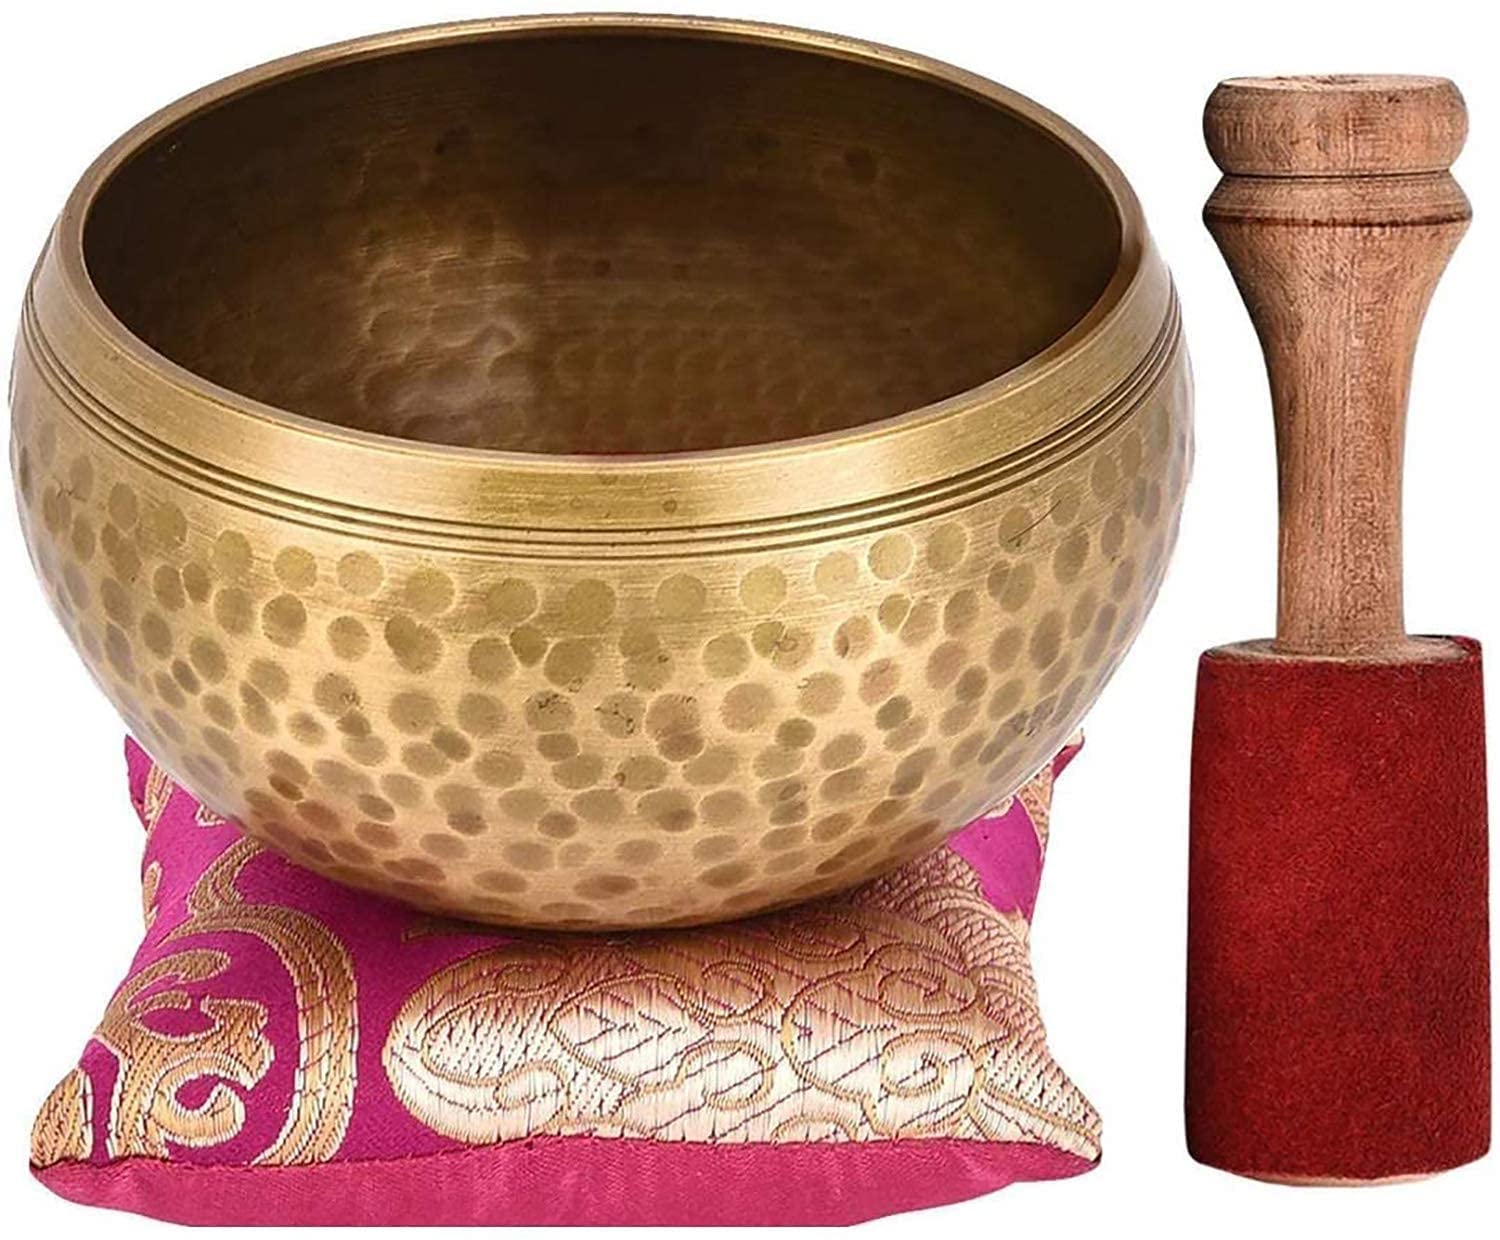 What should I look for when buying a Tibetan singing bowl?